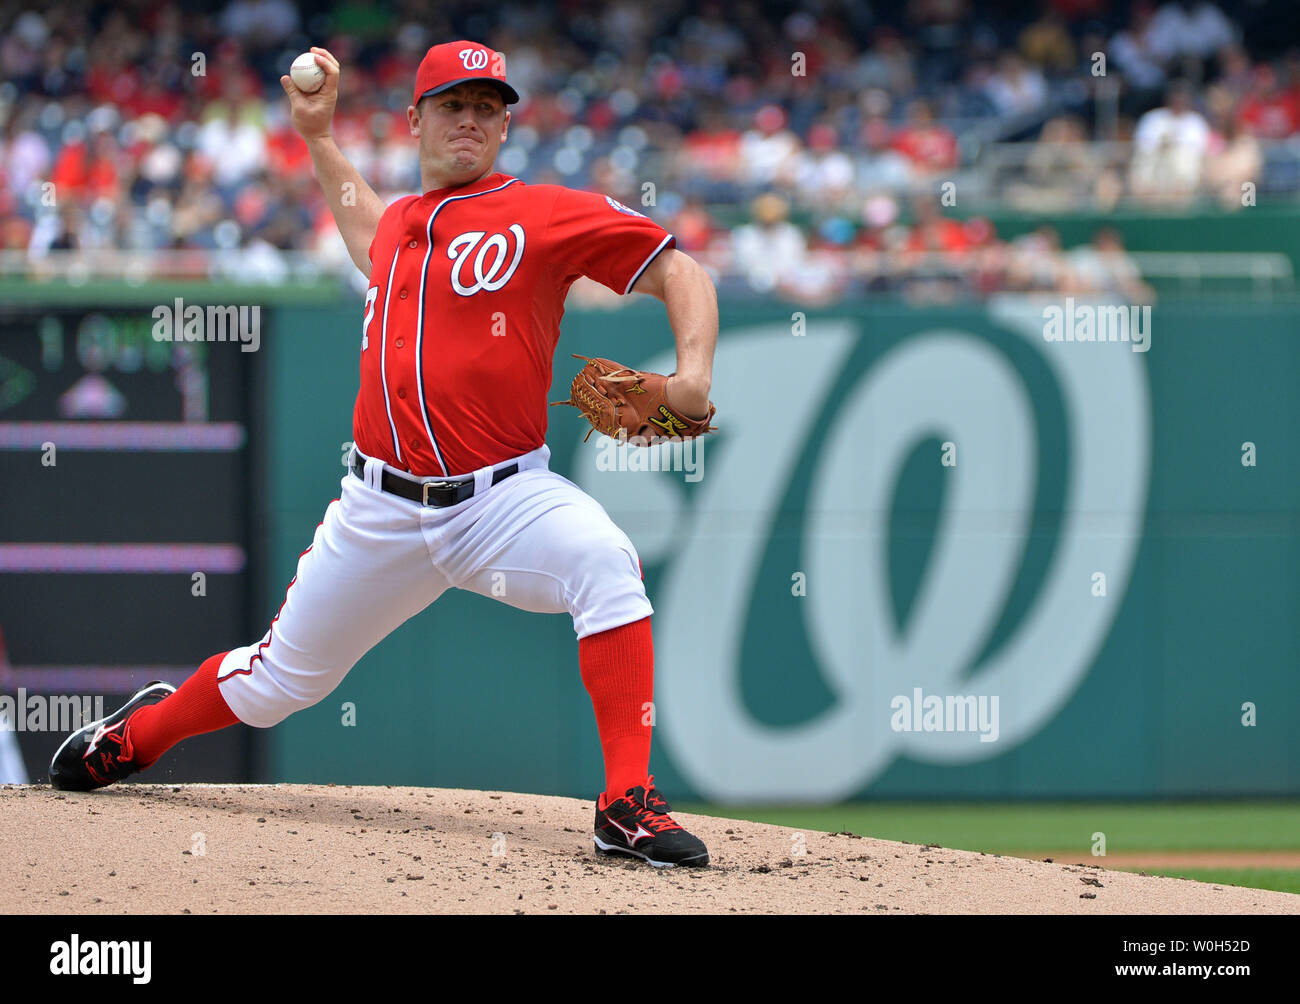 Washington Nationals pitcher Jordan Zimmermann pitches against the Minnesota Twins during the first inning at Nationals Park in Washington, D.C. on June 9, 2013.  UPI/Kevin Dietsch Stock Photo